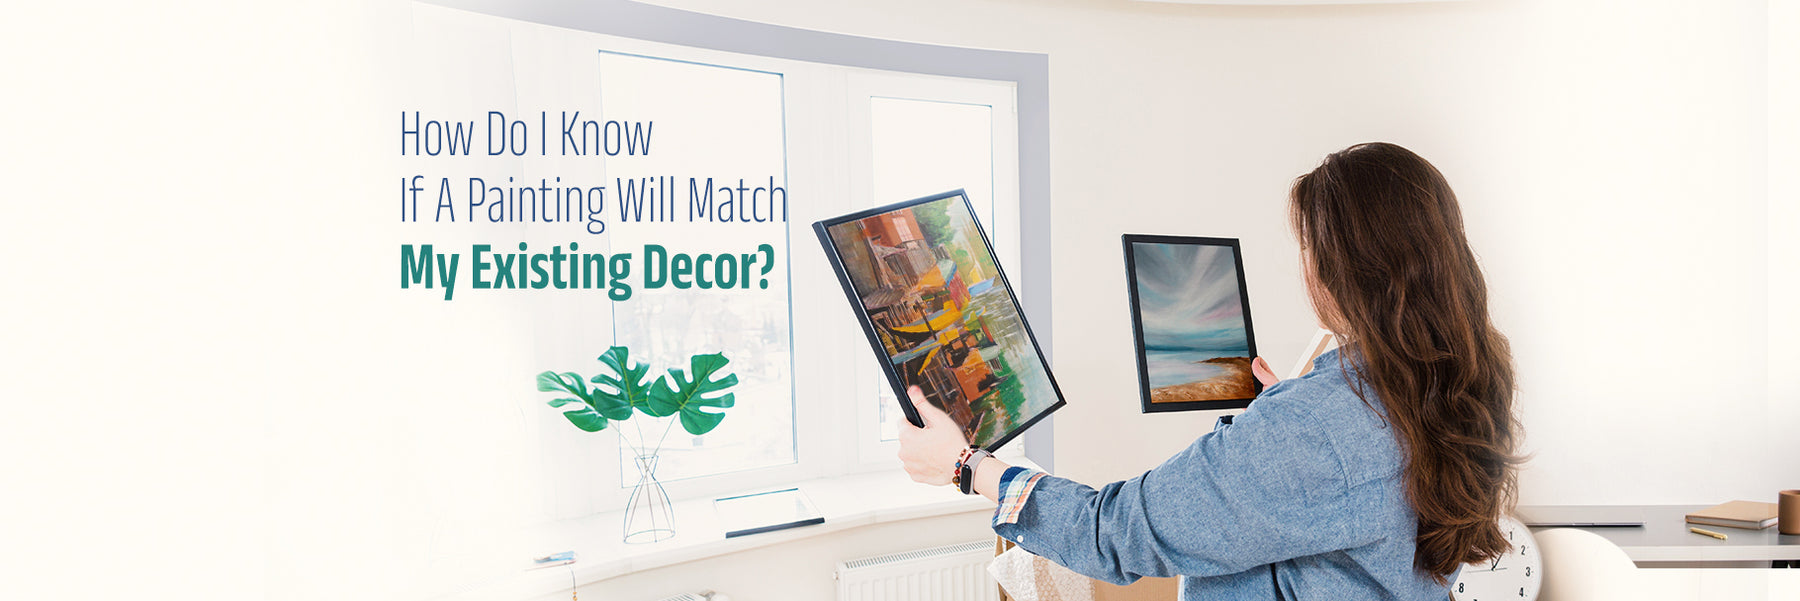 How Do I Know If A Painting Will Match My Existing Decor?